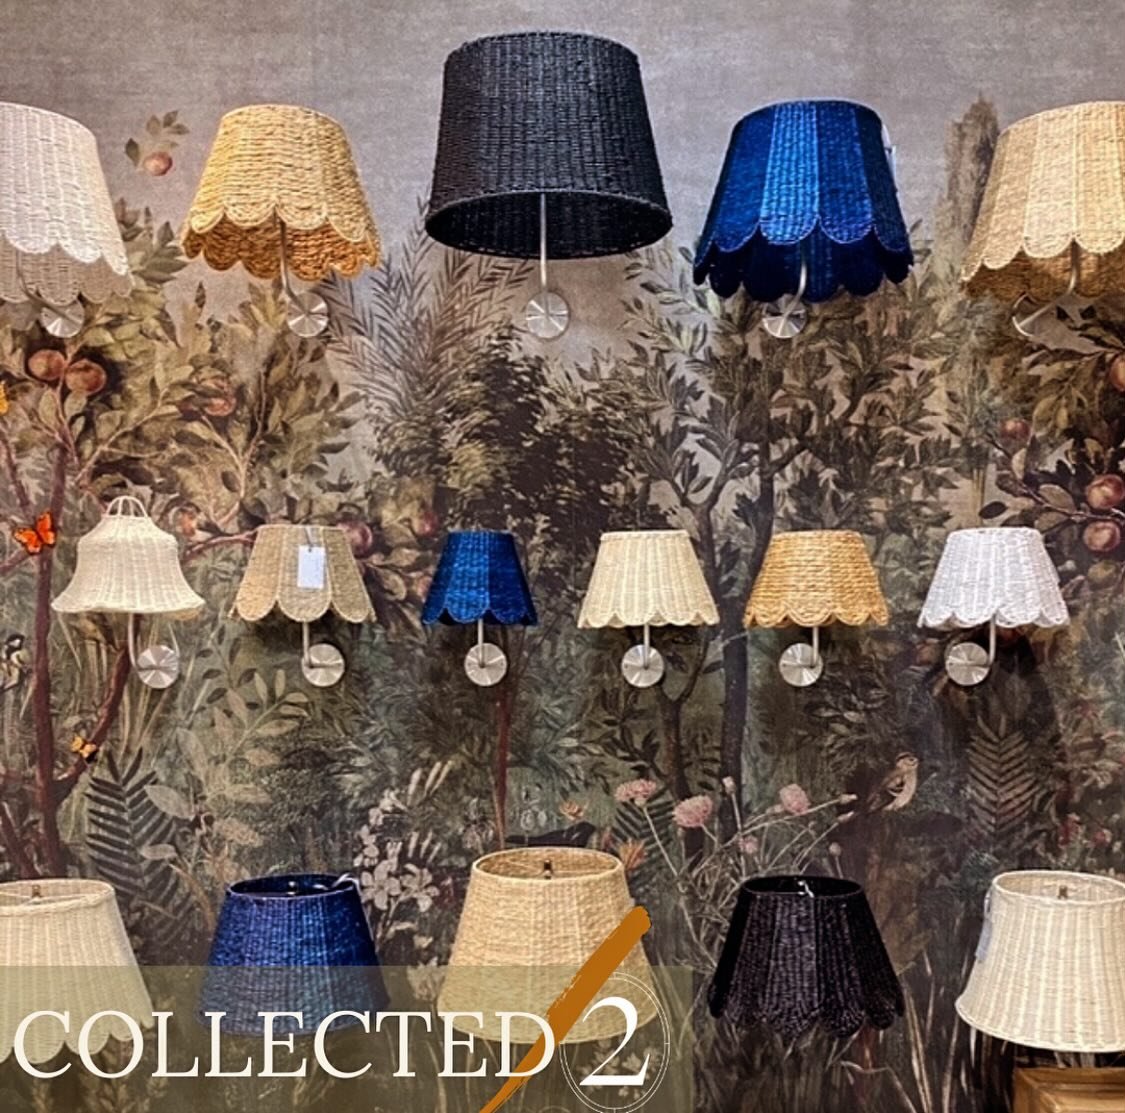 Another trend I saw at High Point Market was fun and unique lampshades. This is the easiest update you can do, replace some of your lamp shades with fabric shades or some cute rattan ones like these. Easy Peasy Lemon Squeezy! For more inspiration, si